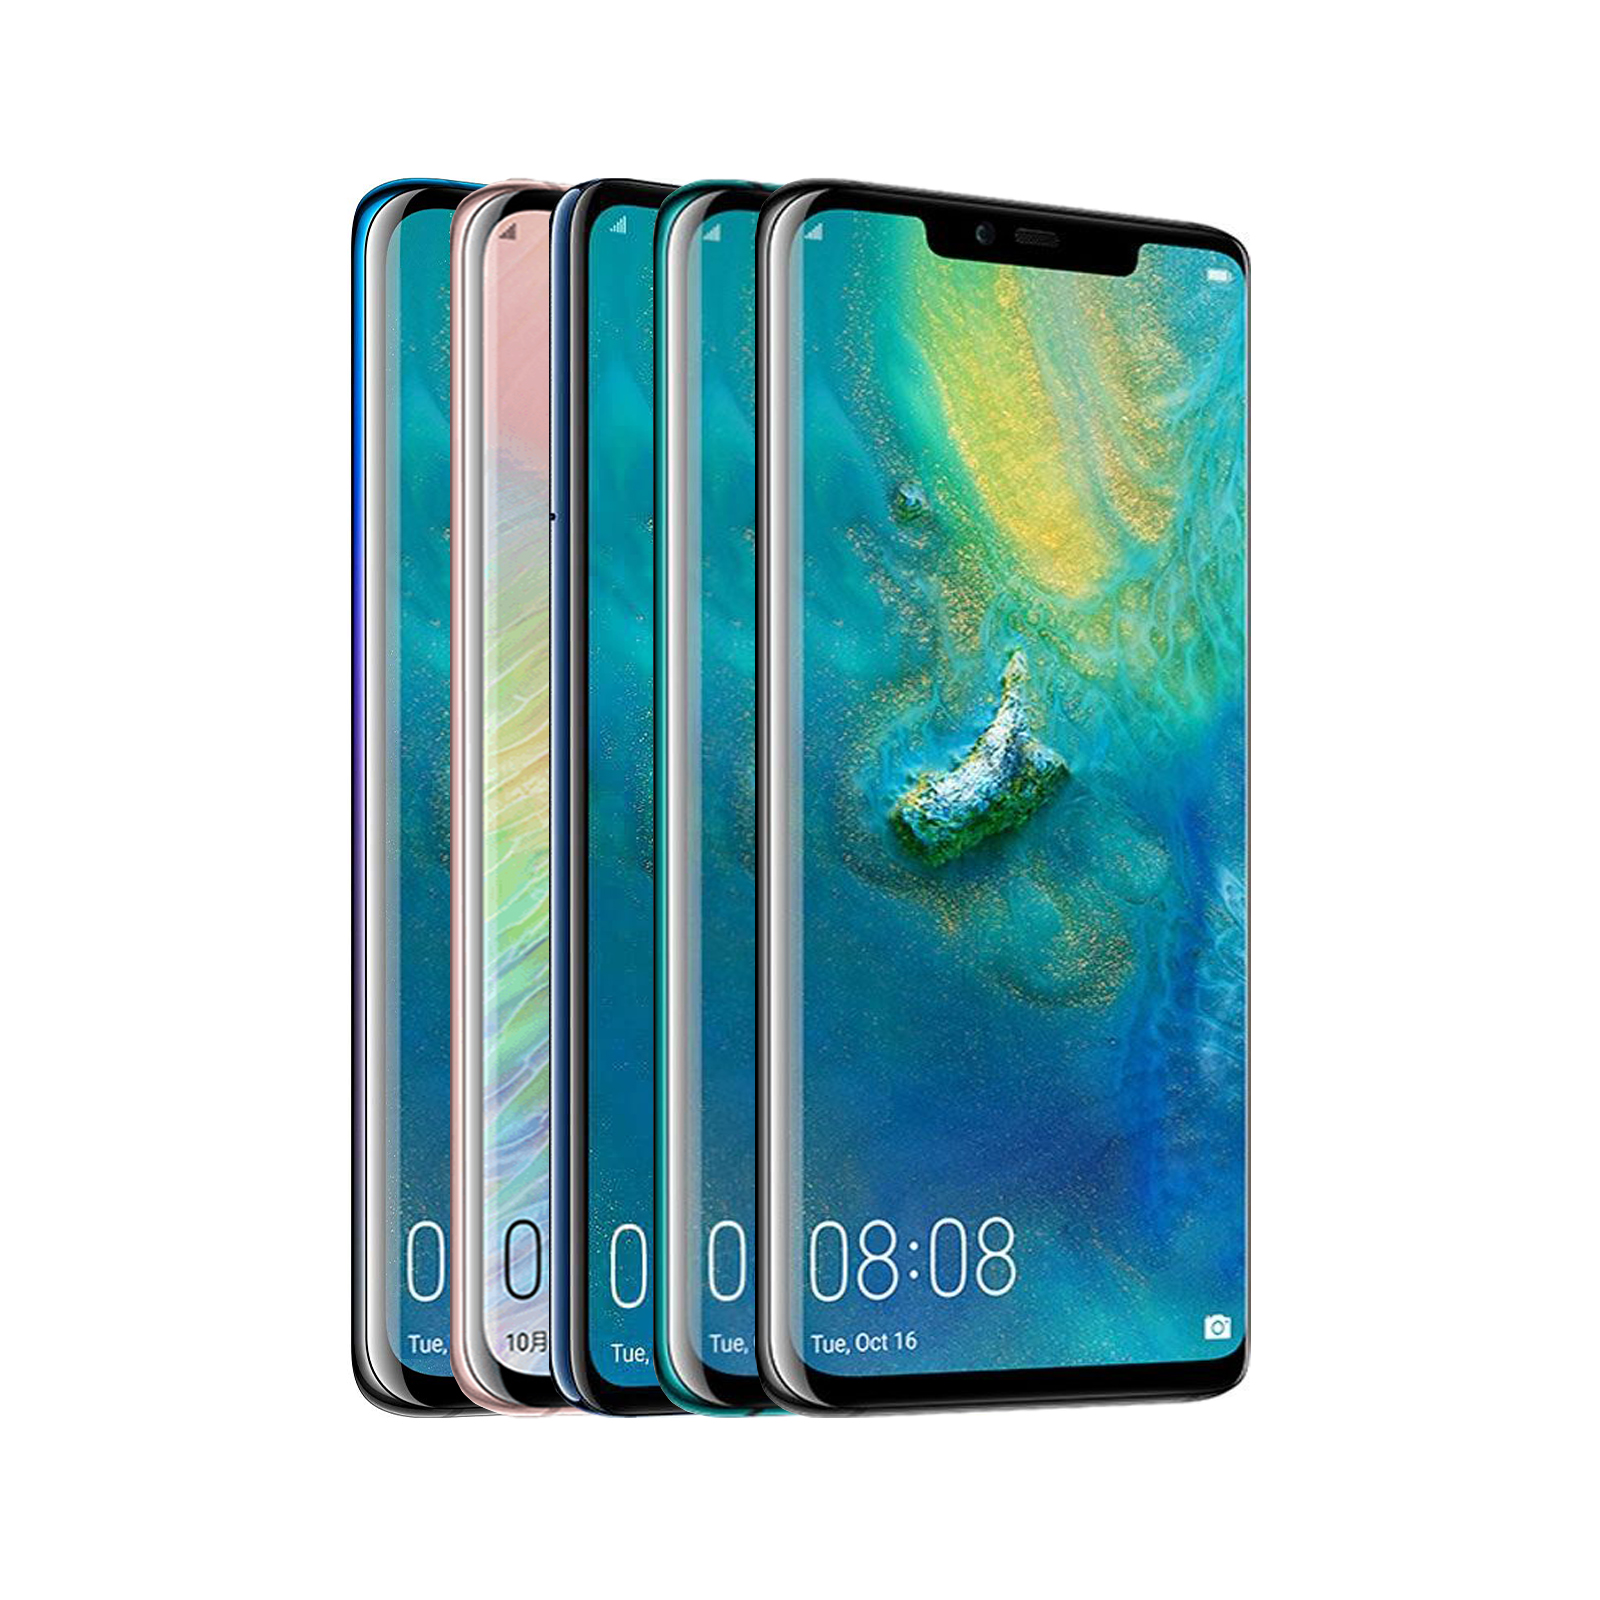 Huawei Mate 20 Pro - As New